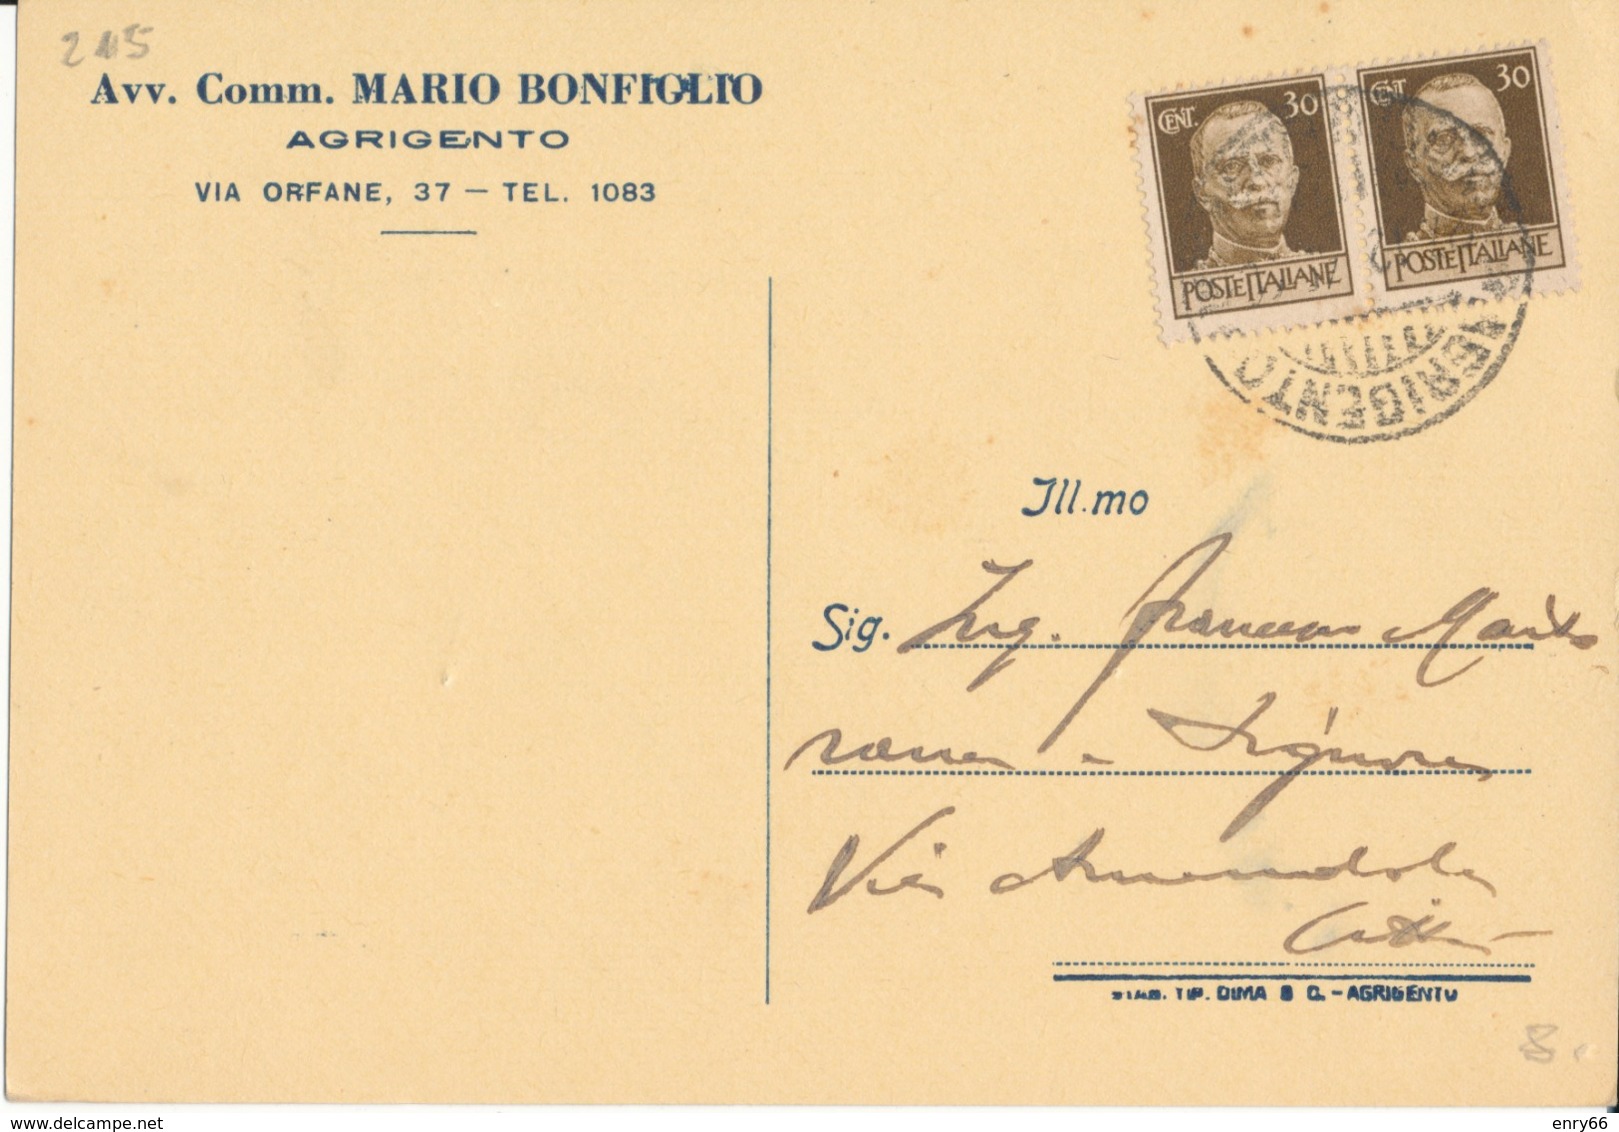 AGRIGENTO 26-12-45 CARTOLINA POSTALE IMPERIALE CENT 30 X 2 - Marcophilie